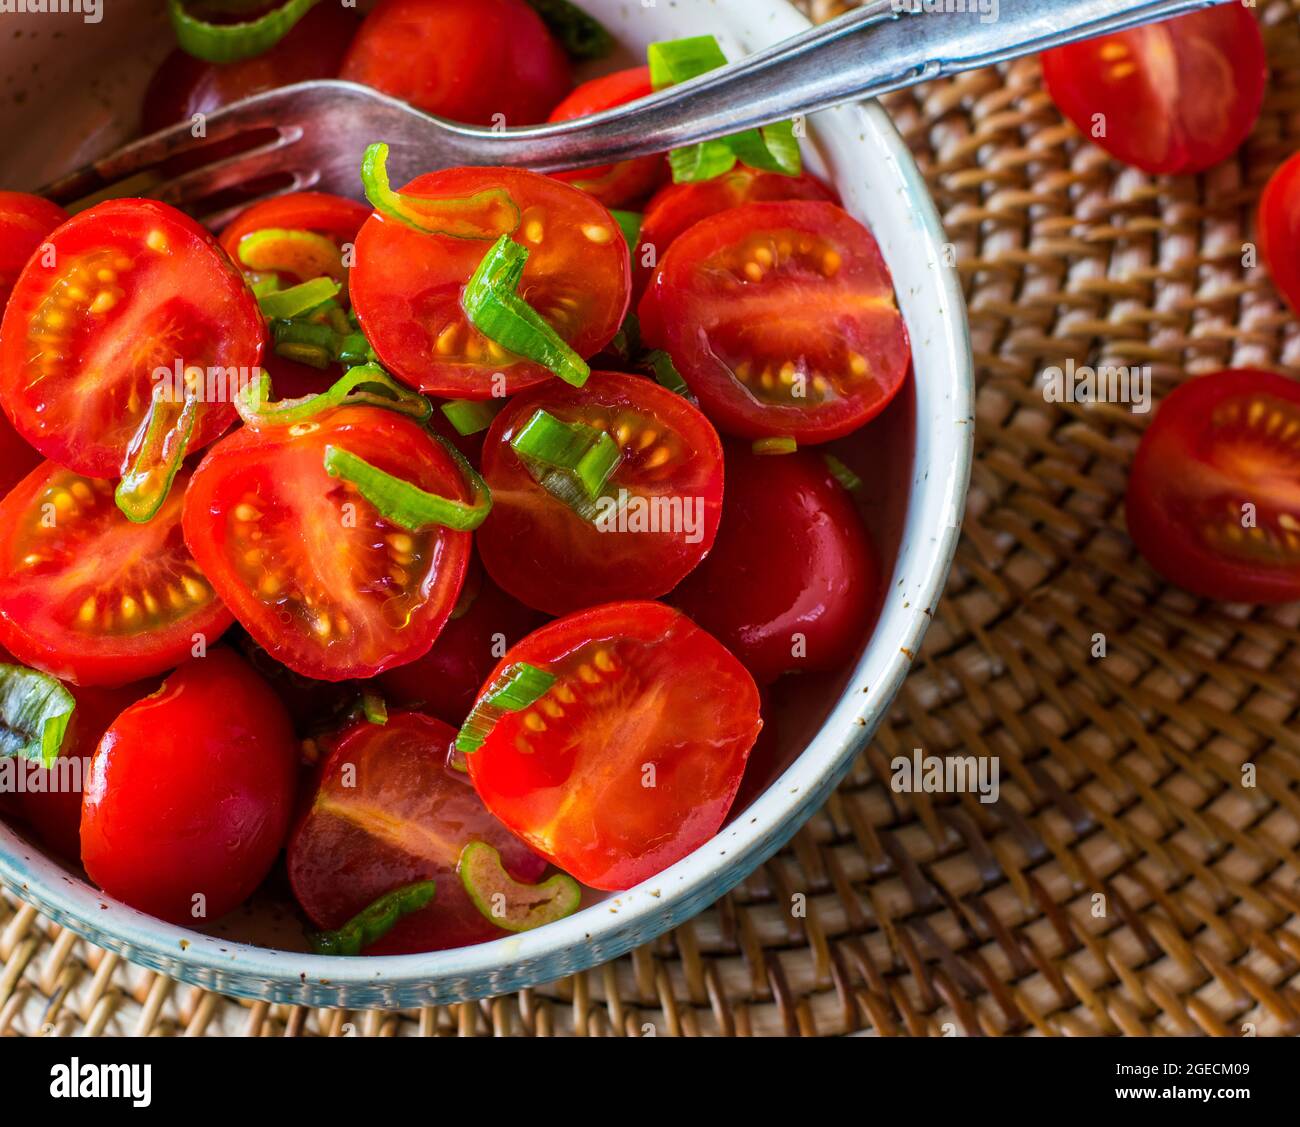 A bowl of fresh cherry tomatoes with olive oil and chives Stock Photo